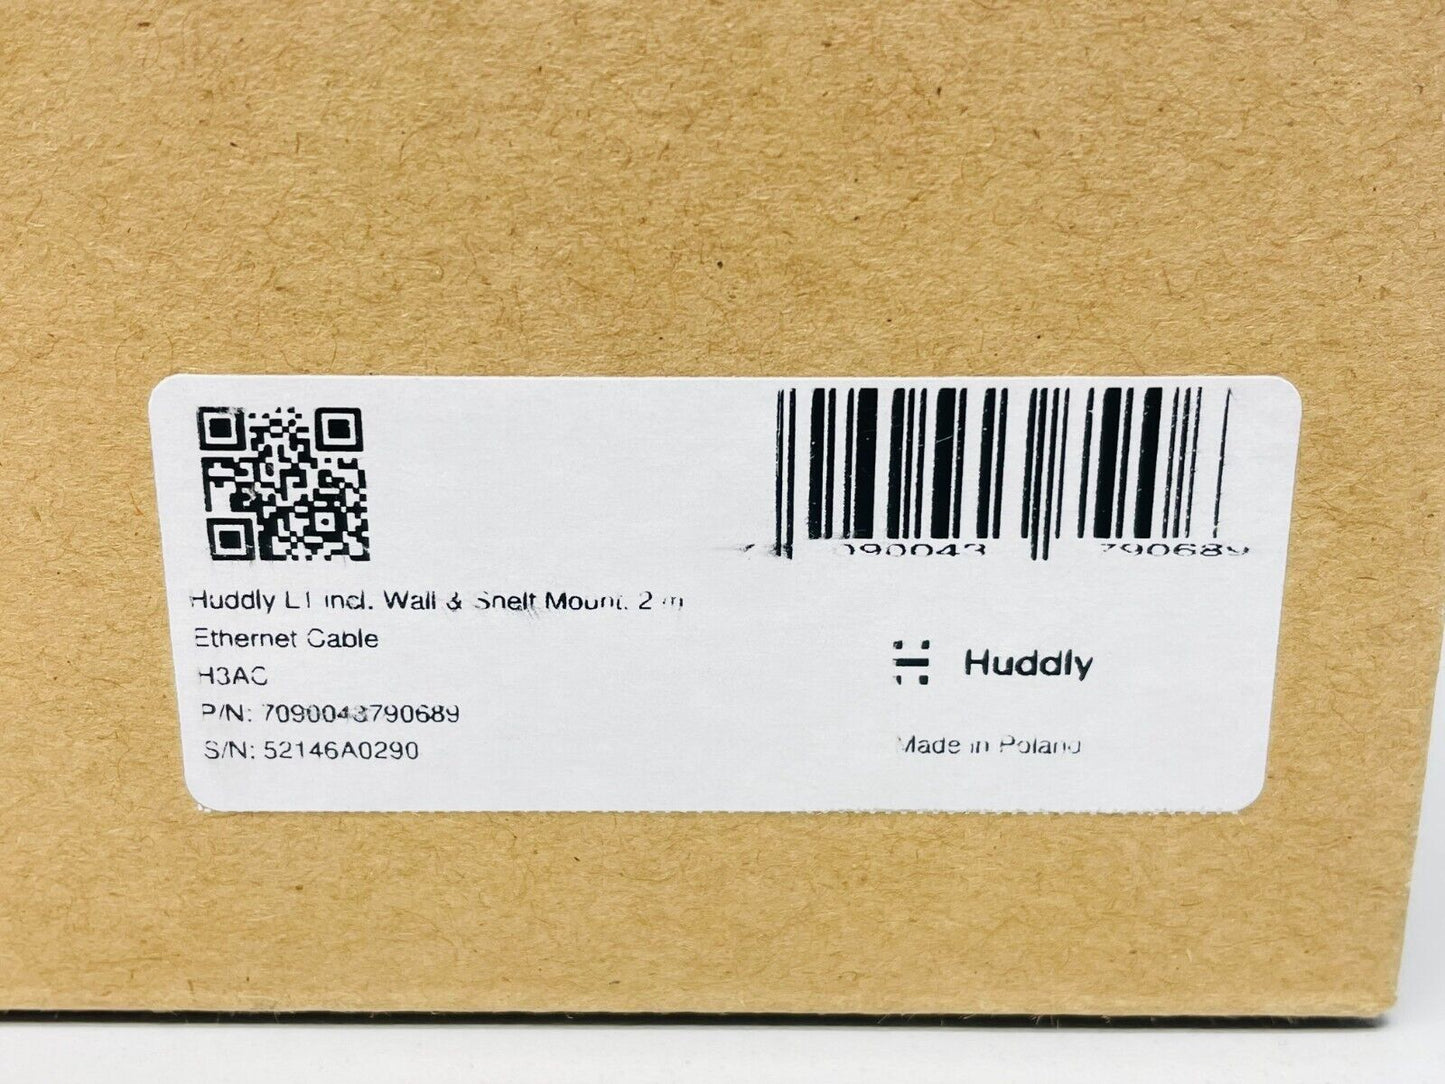 Huddly L1 incl. Wall and Shelf Mount 7090043790689